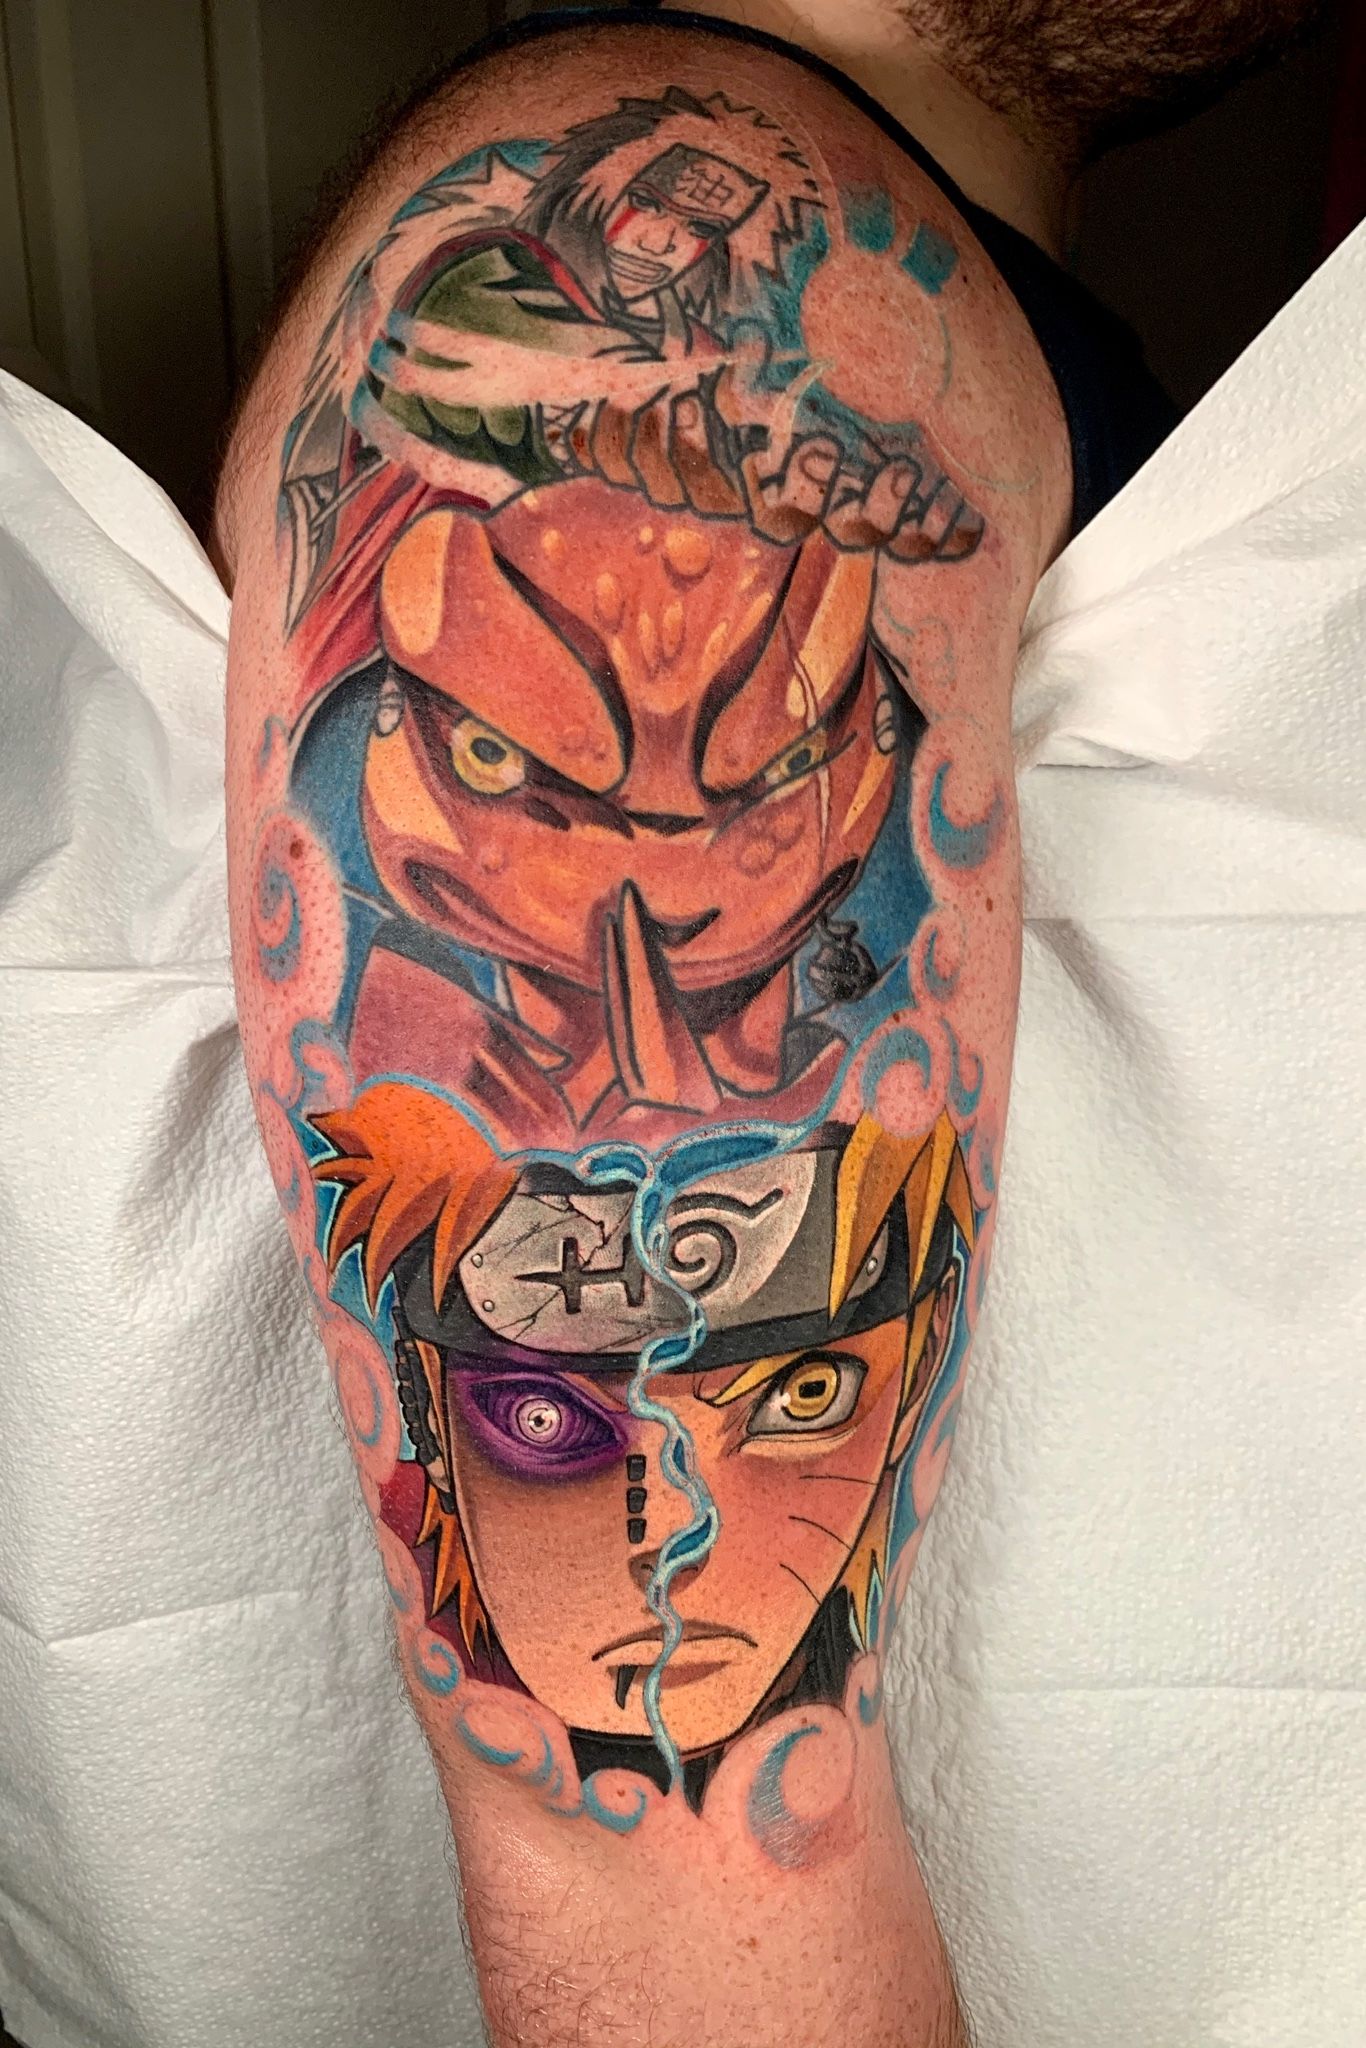 This Naruto Minato  Jiraiya tattoo by fatkidtattoos is SO cool    Instagram